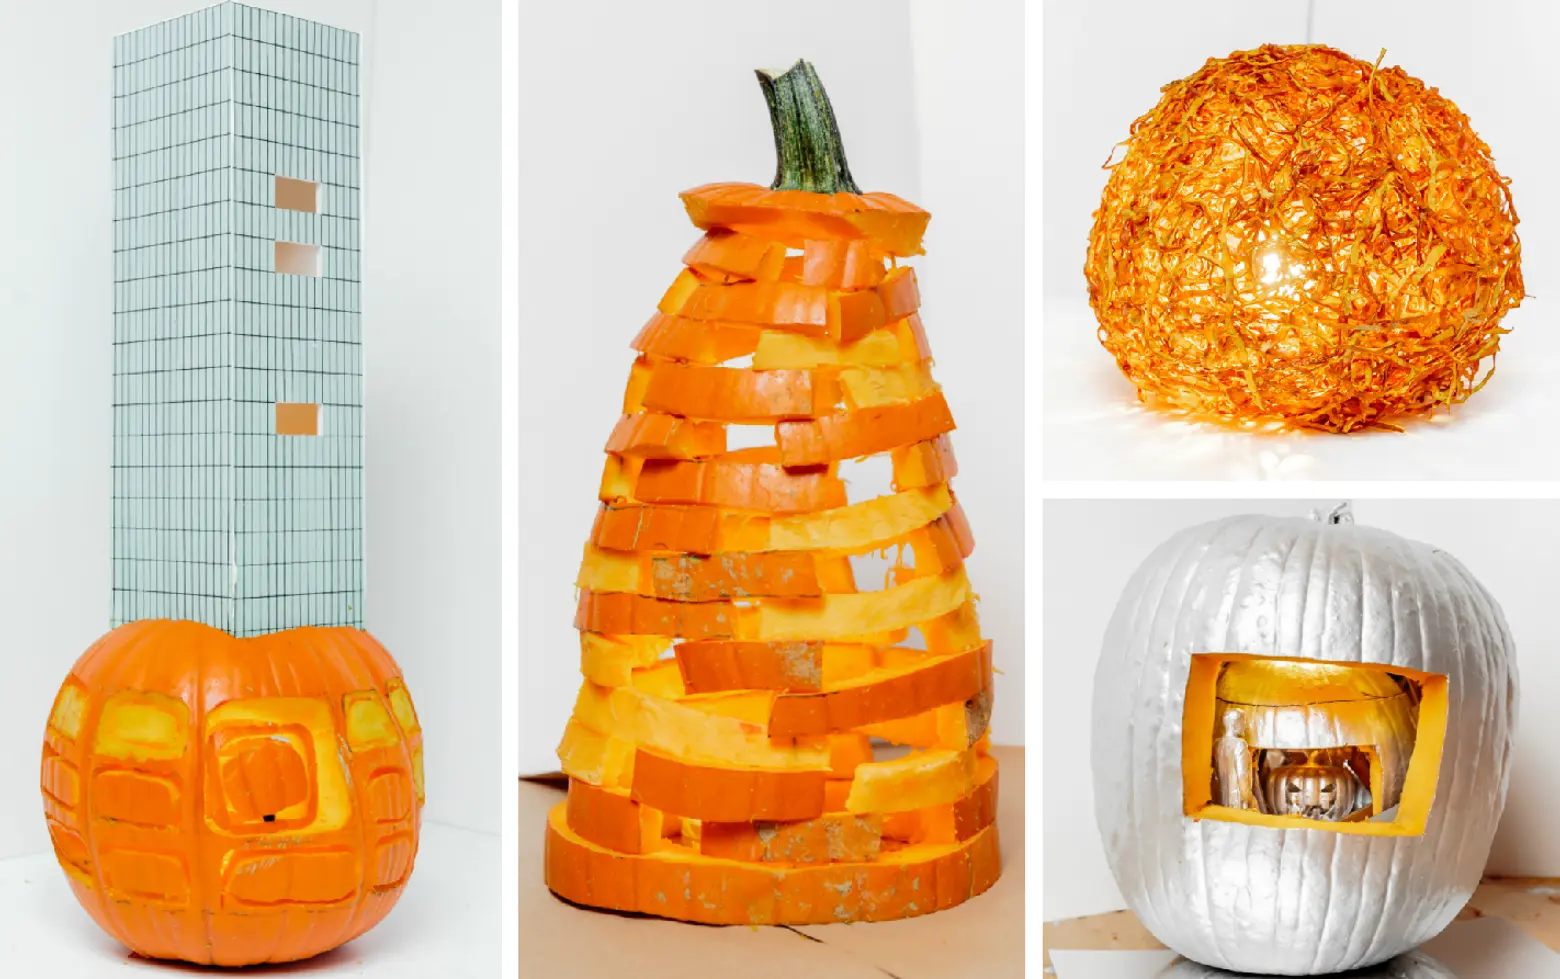 See how NYC’s top architecture firms carved their Halloween pumpkins